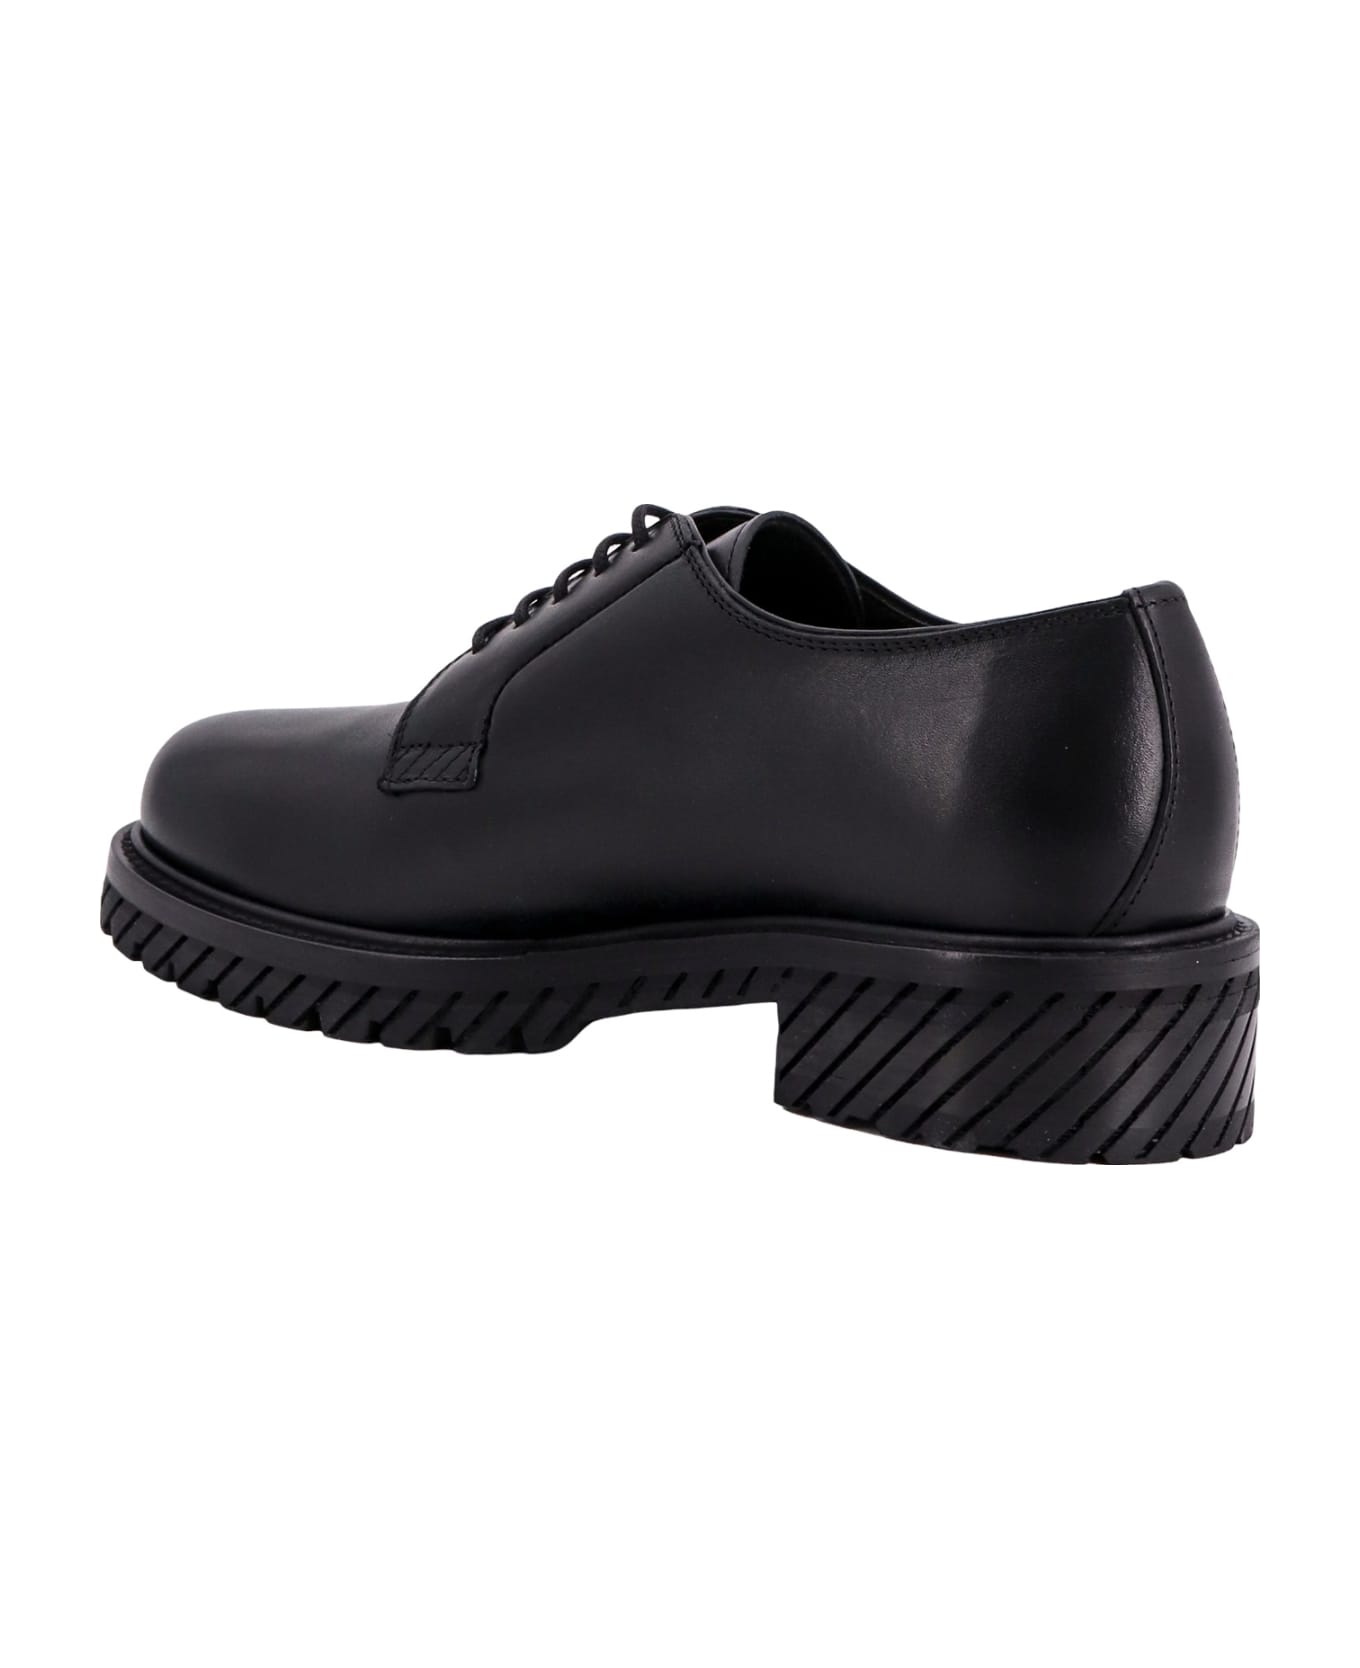 Off-White Military Derby Shoes - Black レースアップシューズ